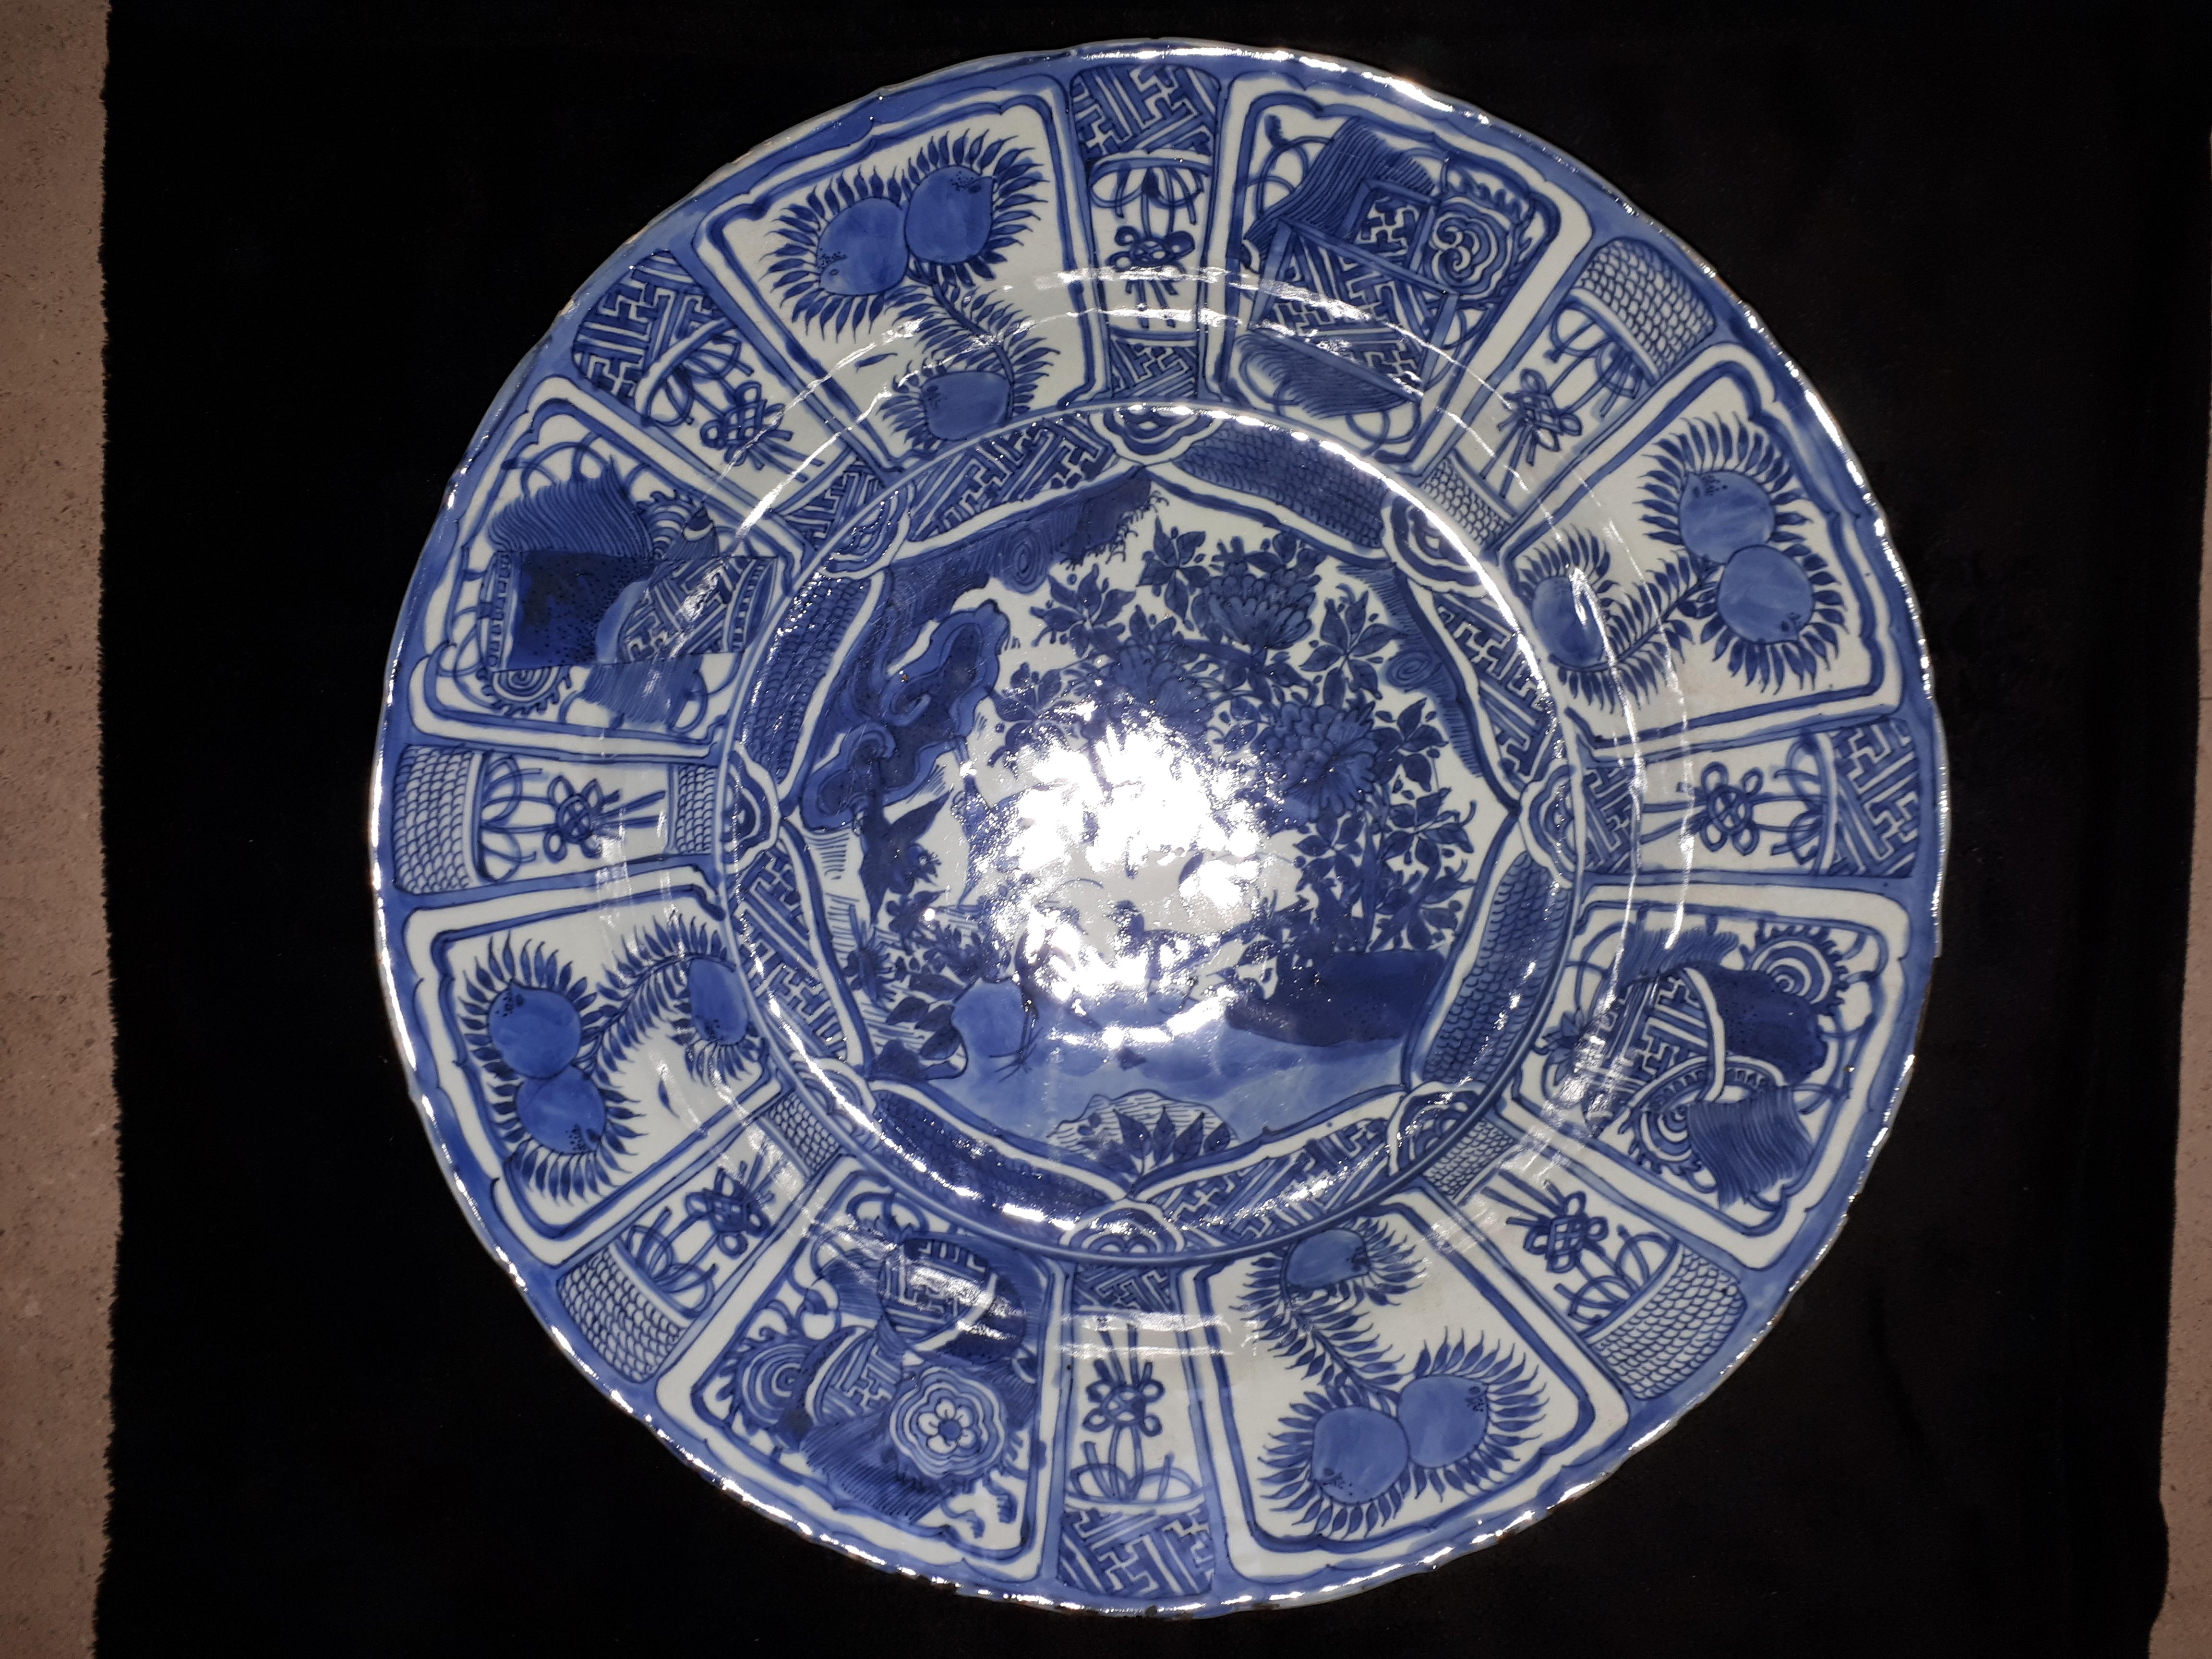 Slightly lobed dish in eight braces with flared rim with underglaze blue decoration of birds in a garden.
Usual frittings on the border and a fine hairline at 12 o'clock (invisible to the naked eye), otherwise superb state of conservation given its